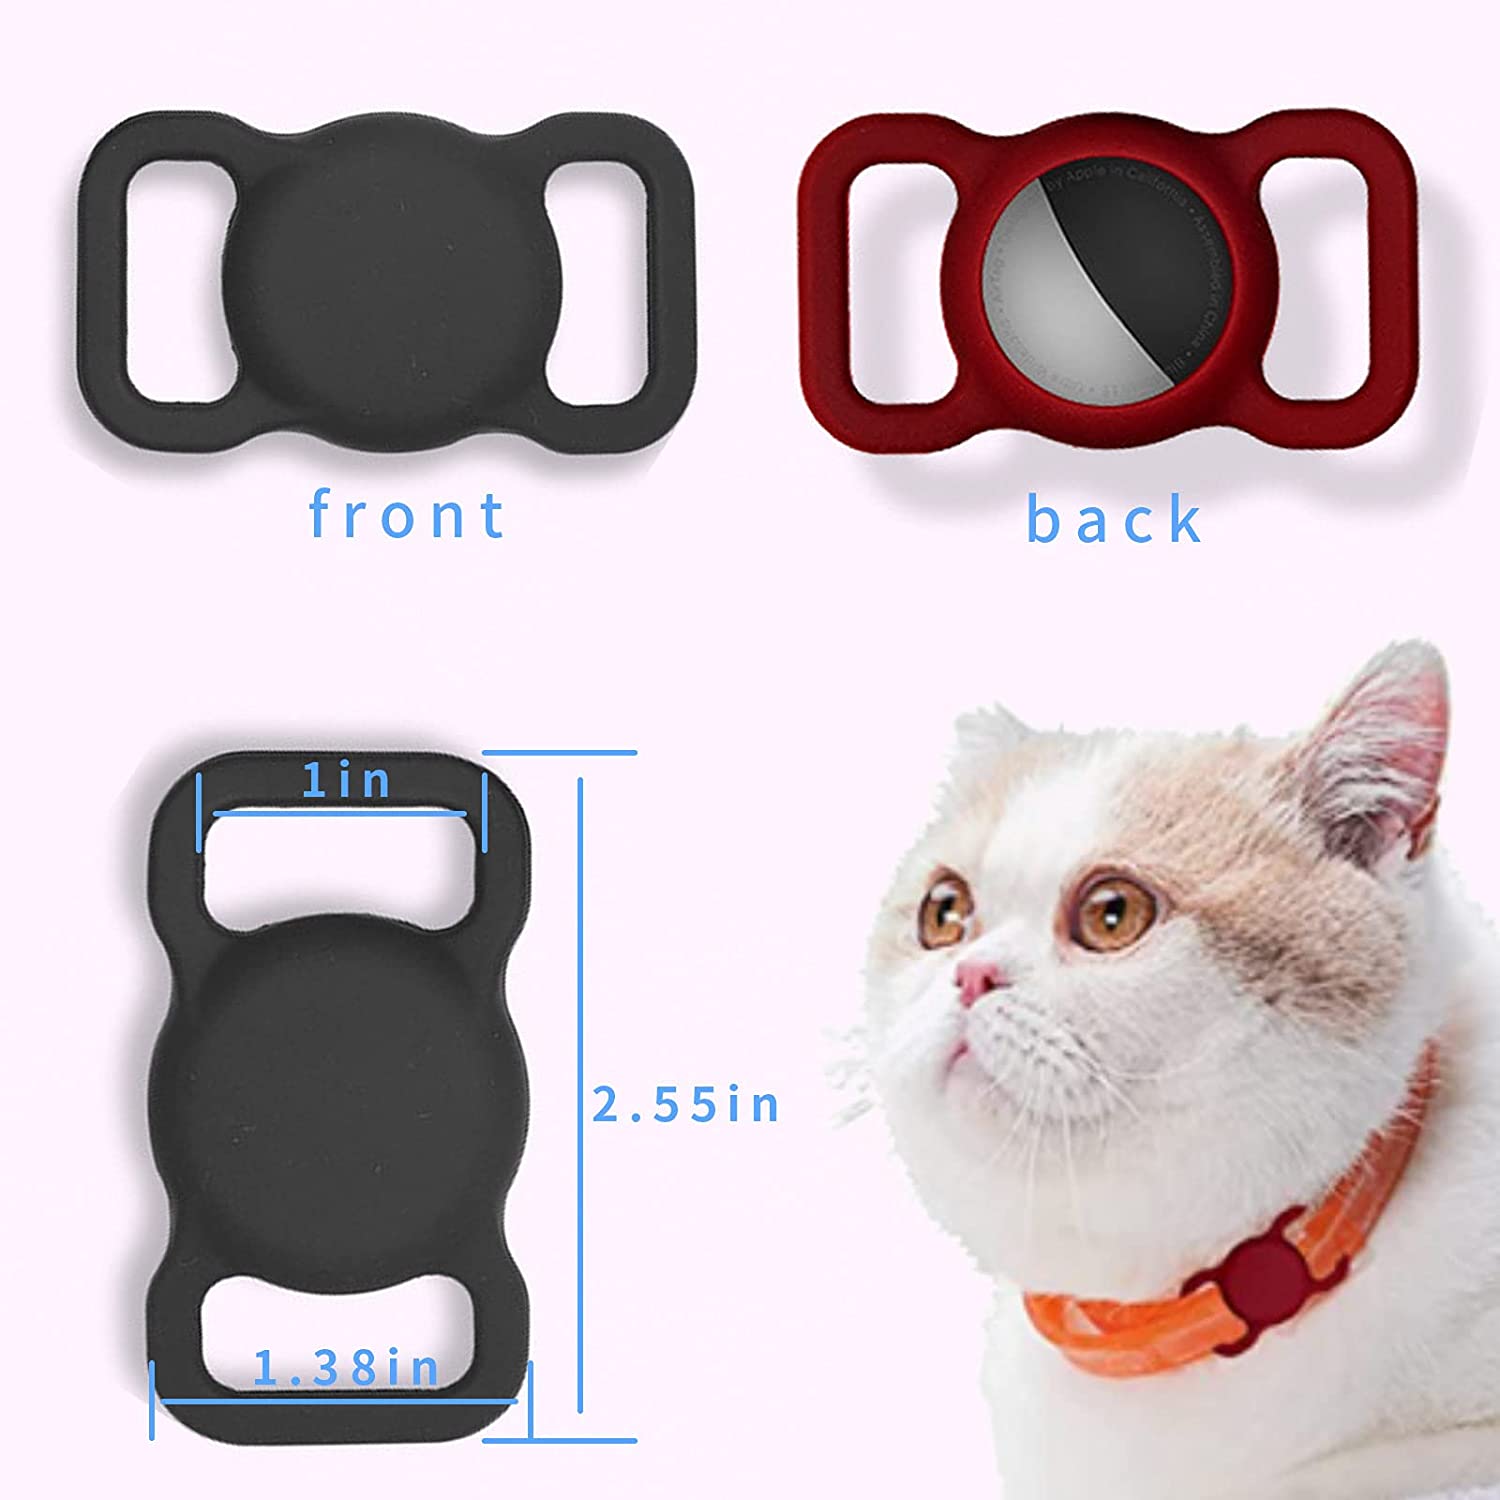 Air Tag Dog Collar Holder Waterproof Small Compatible Protective Cover for Apple Airtag GPS Tracking Dog Cat Soft Silicone Waterproof Protective for Pet Dog Cat and Children Elderly Bags